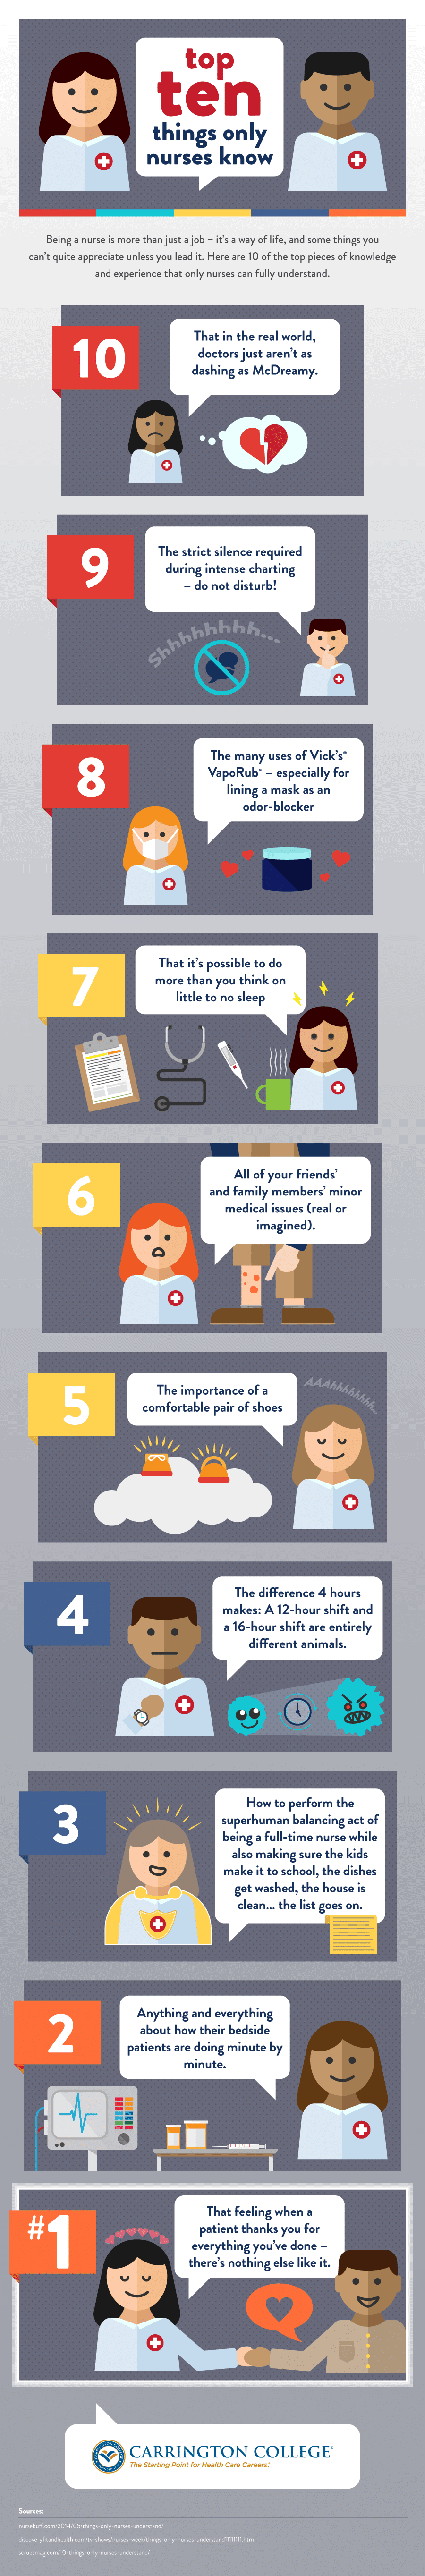 Top-10-Only-Nurses-Know-Infographic